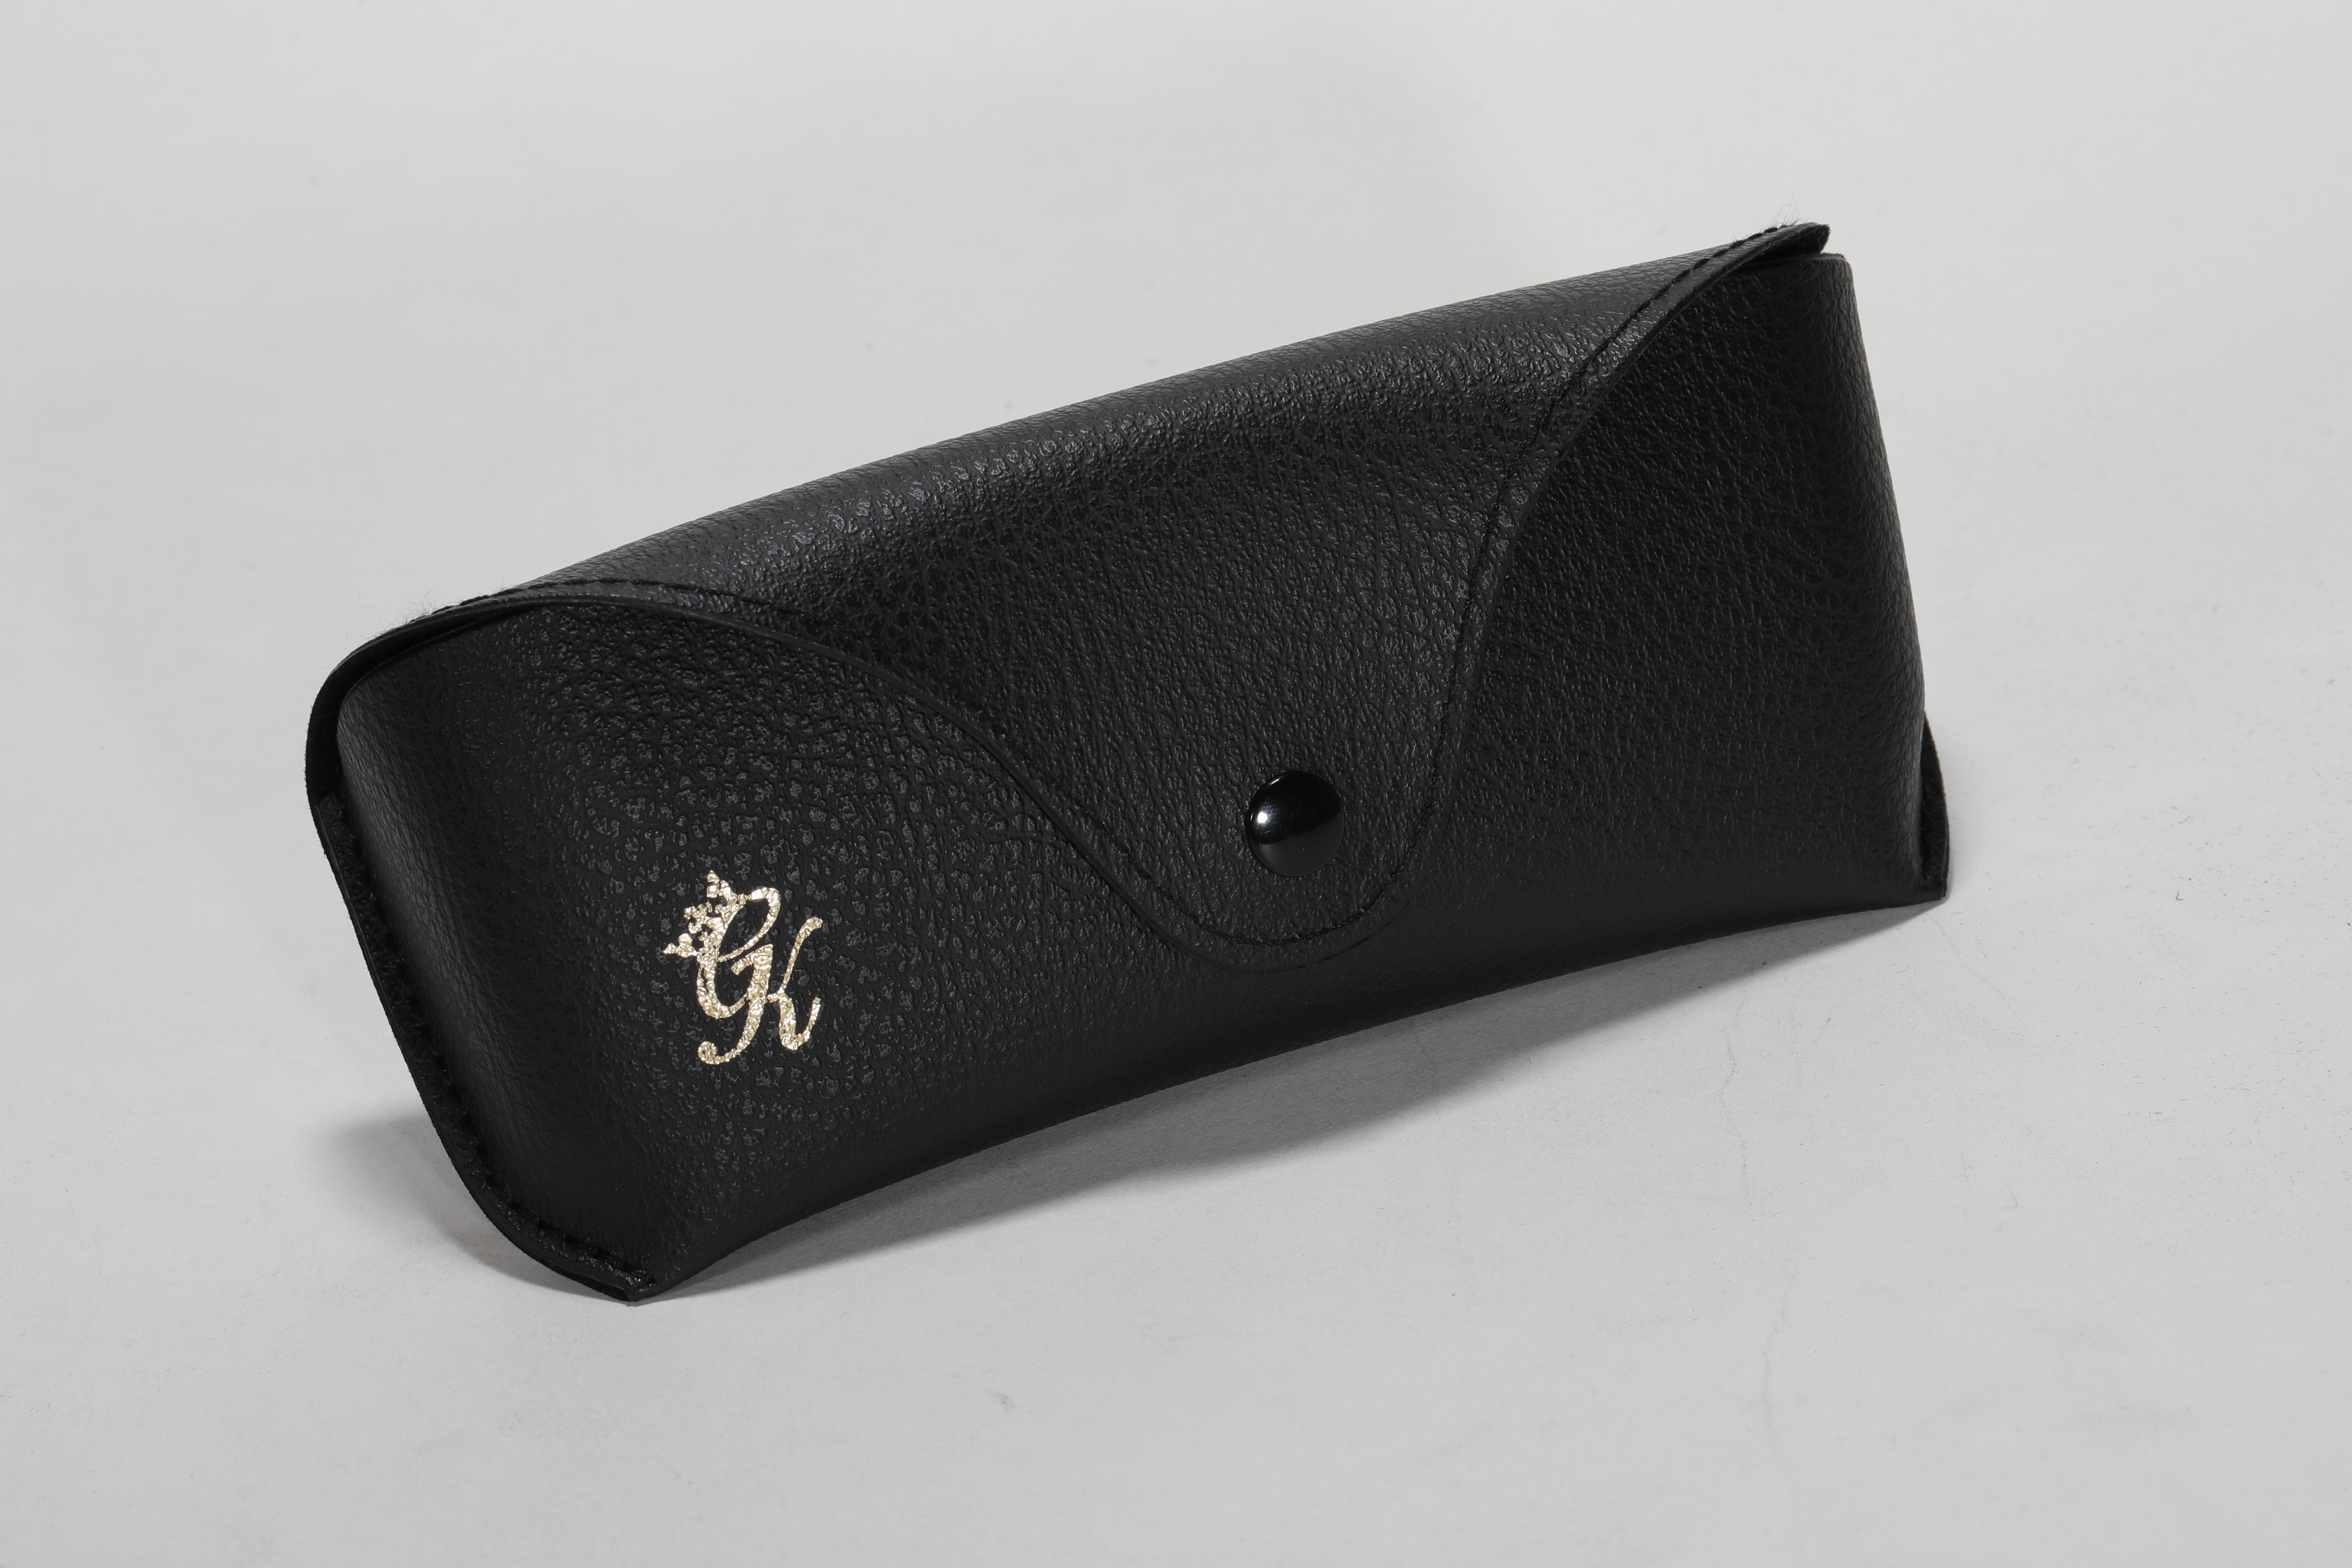 2021 Glasses Box Sunglasses Are Black with LOGO Printed And Look Like A Leather Bag